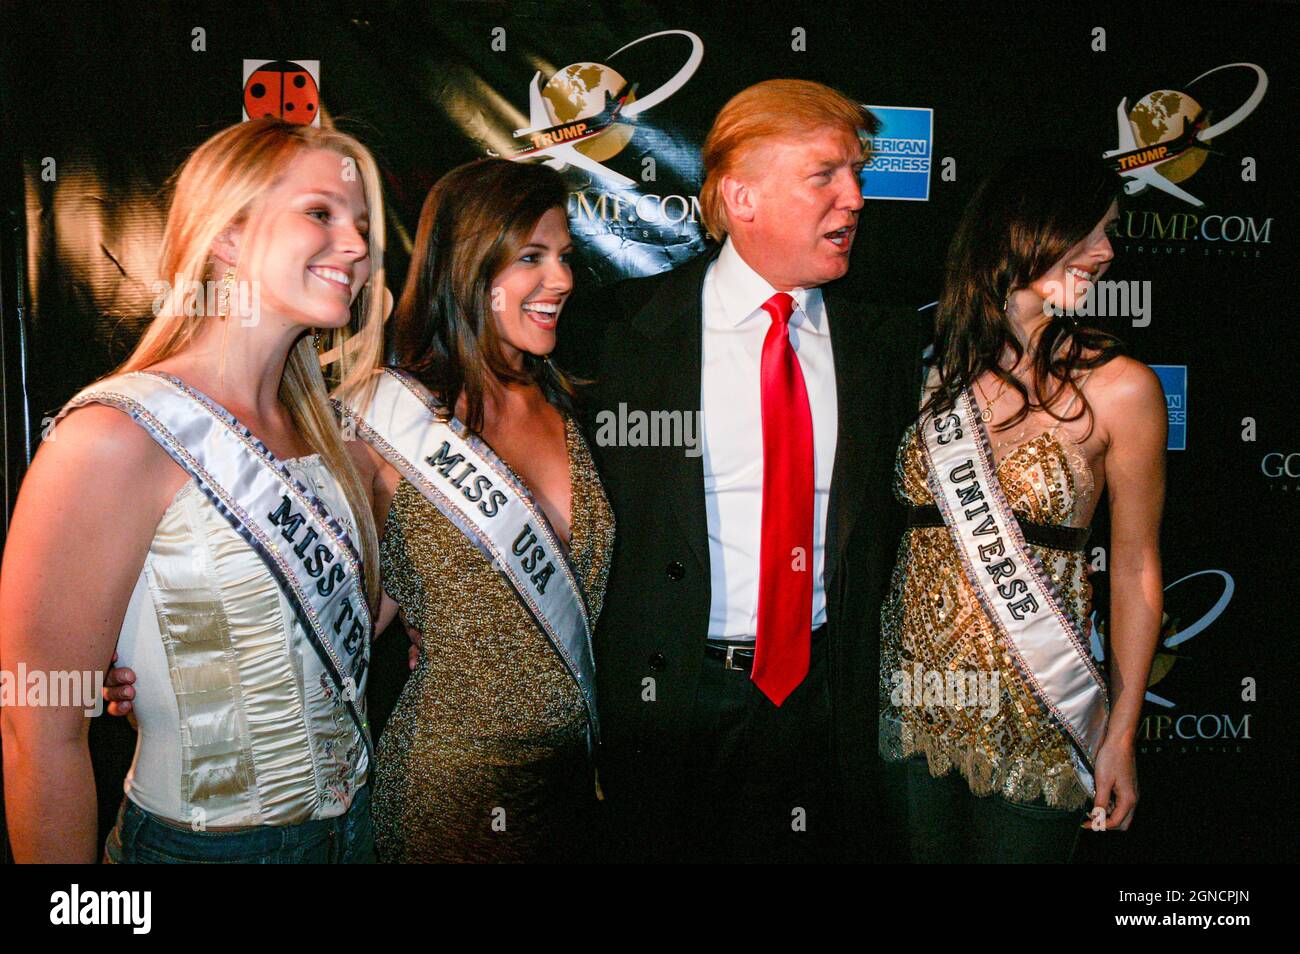 Miss Teen USA 2006, Katie Blair, Miss Universe 2006, Natalie Glebova, Miss USA 2005 Chelsea Cooley, with Donald Trump Red Carpet at the launch party of Stock Photo